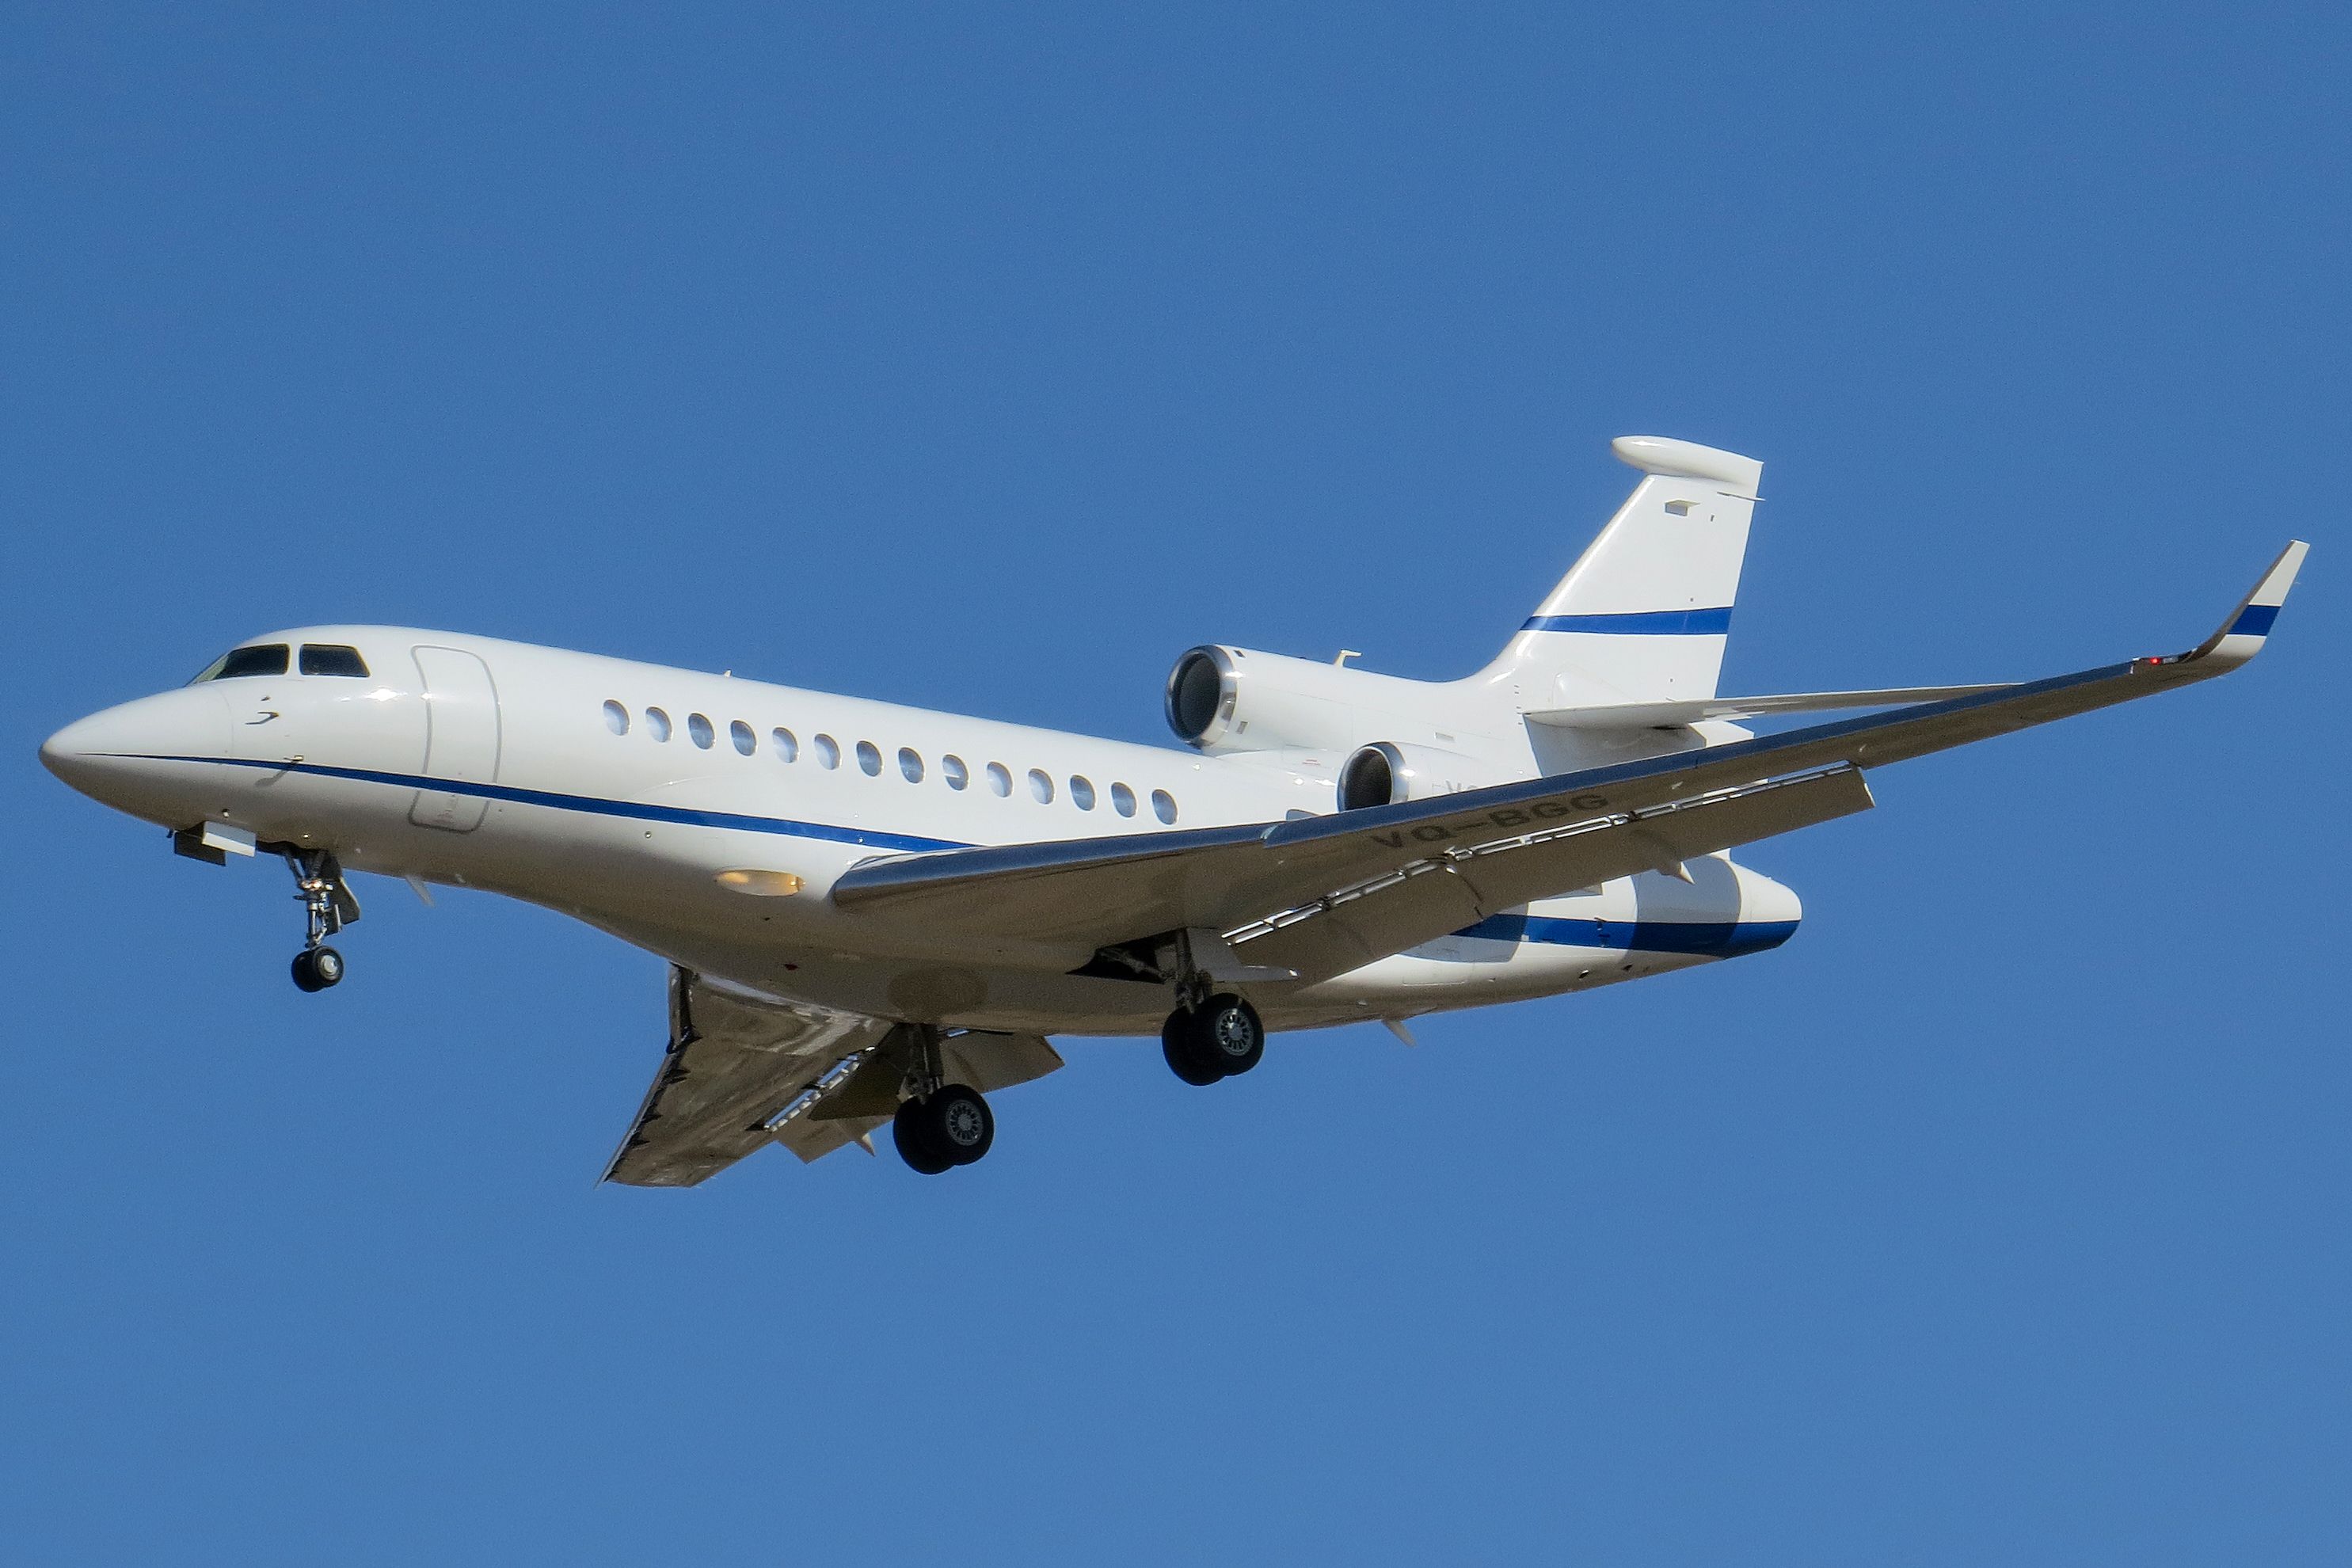 A Dassault Falcon 7X flying in the sky.